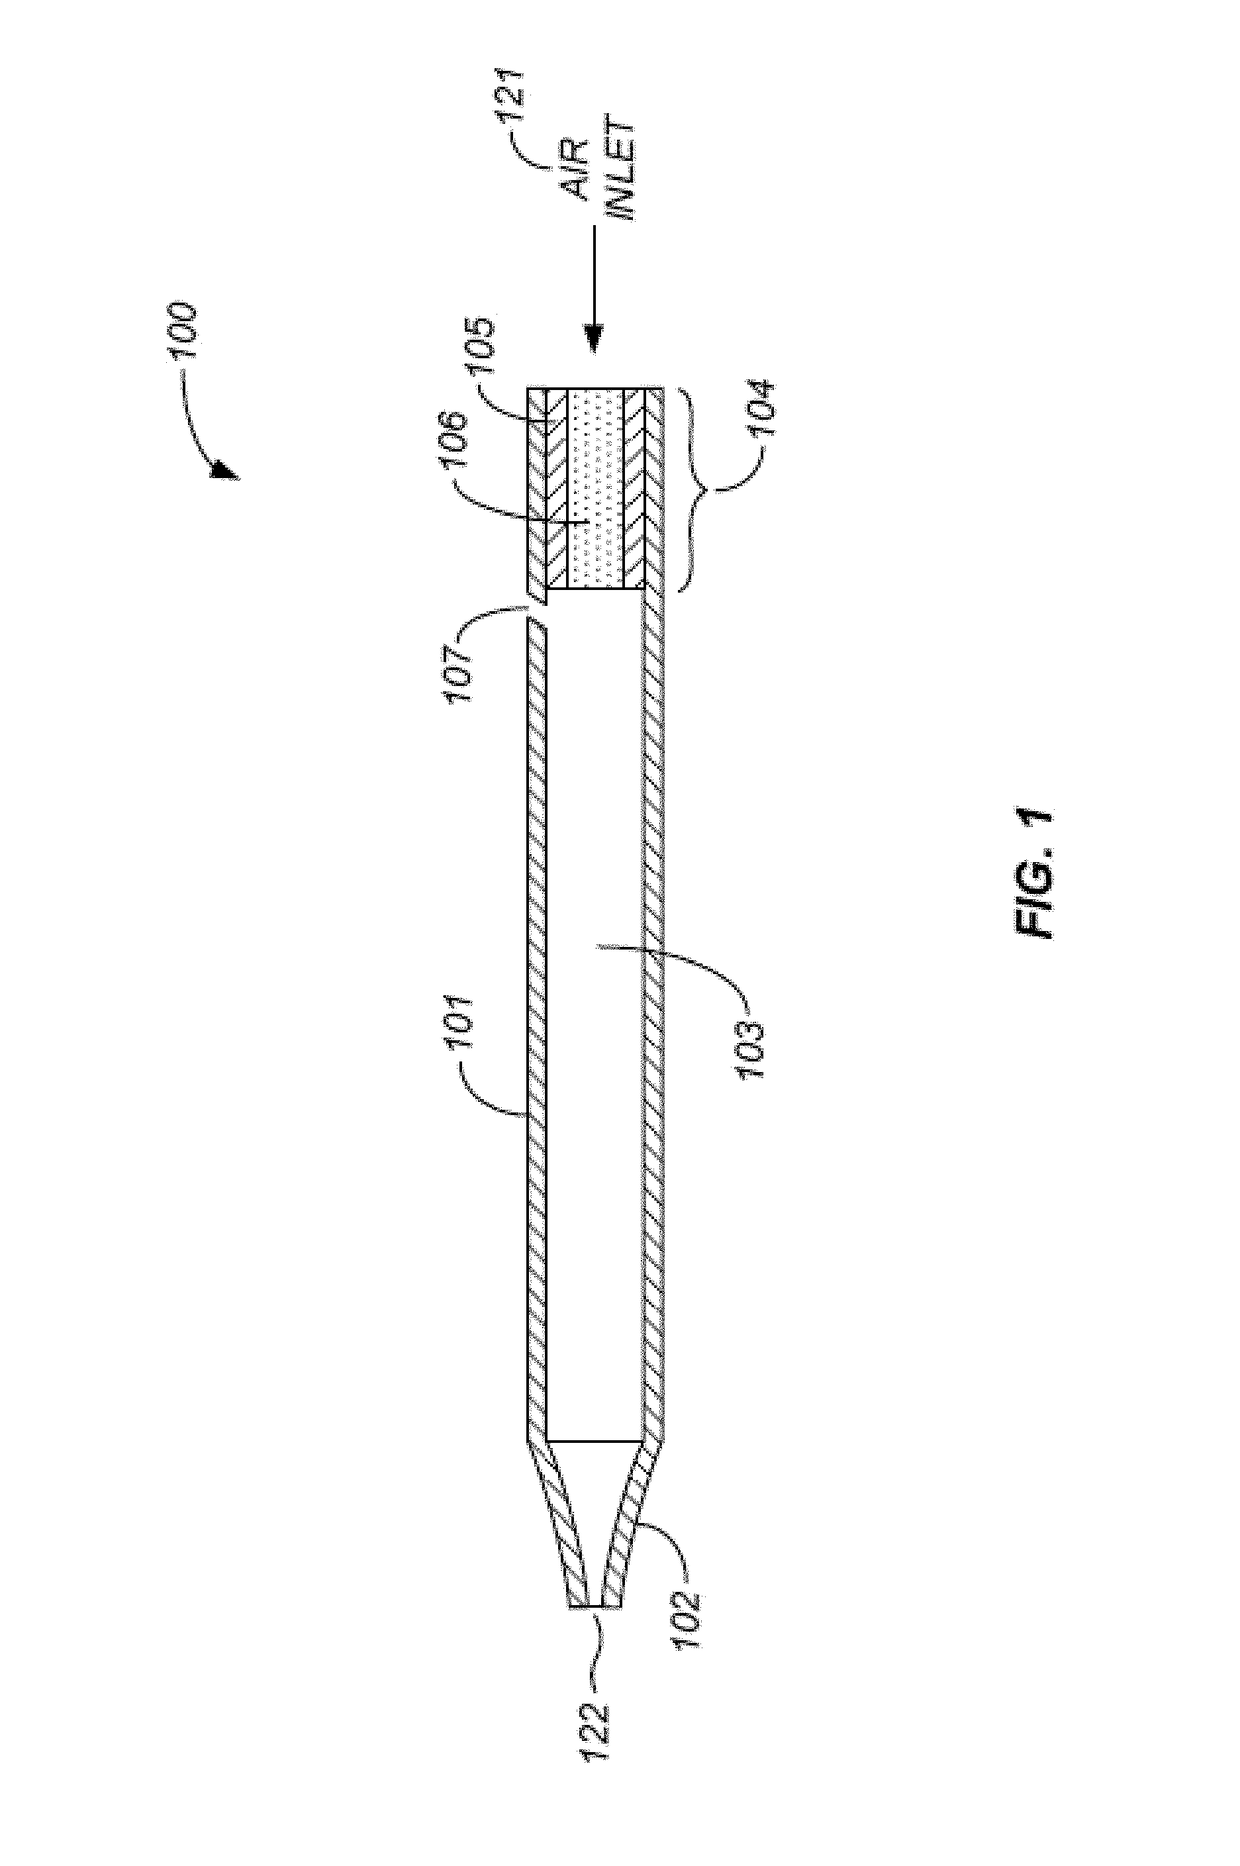 Securely attaching cartridges for vaporizer devices